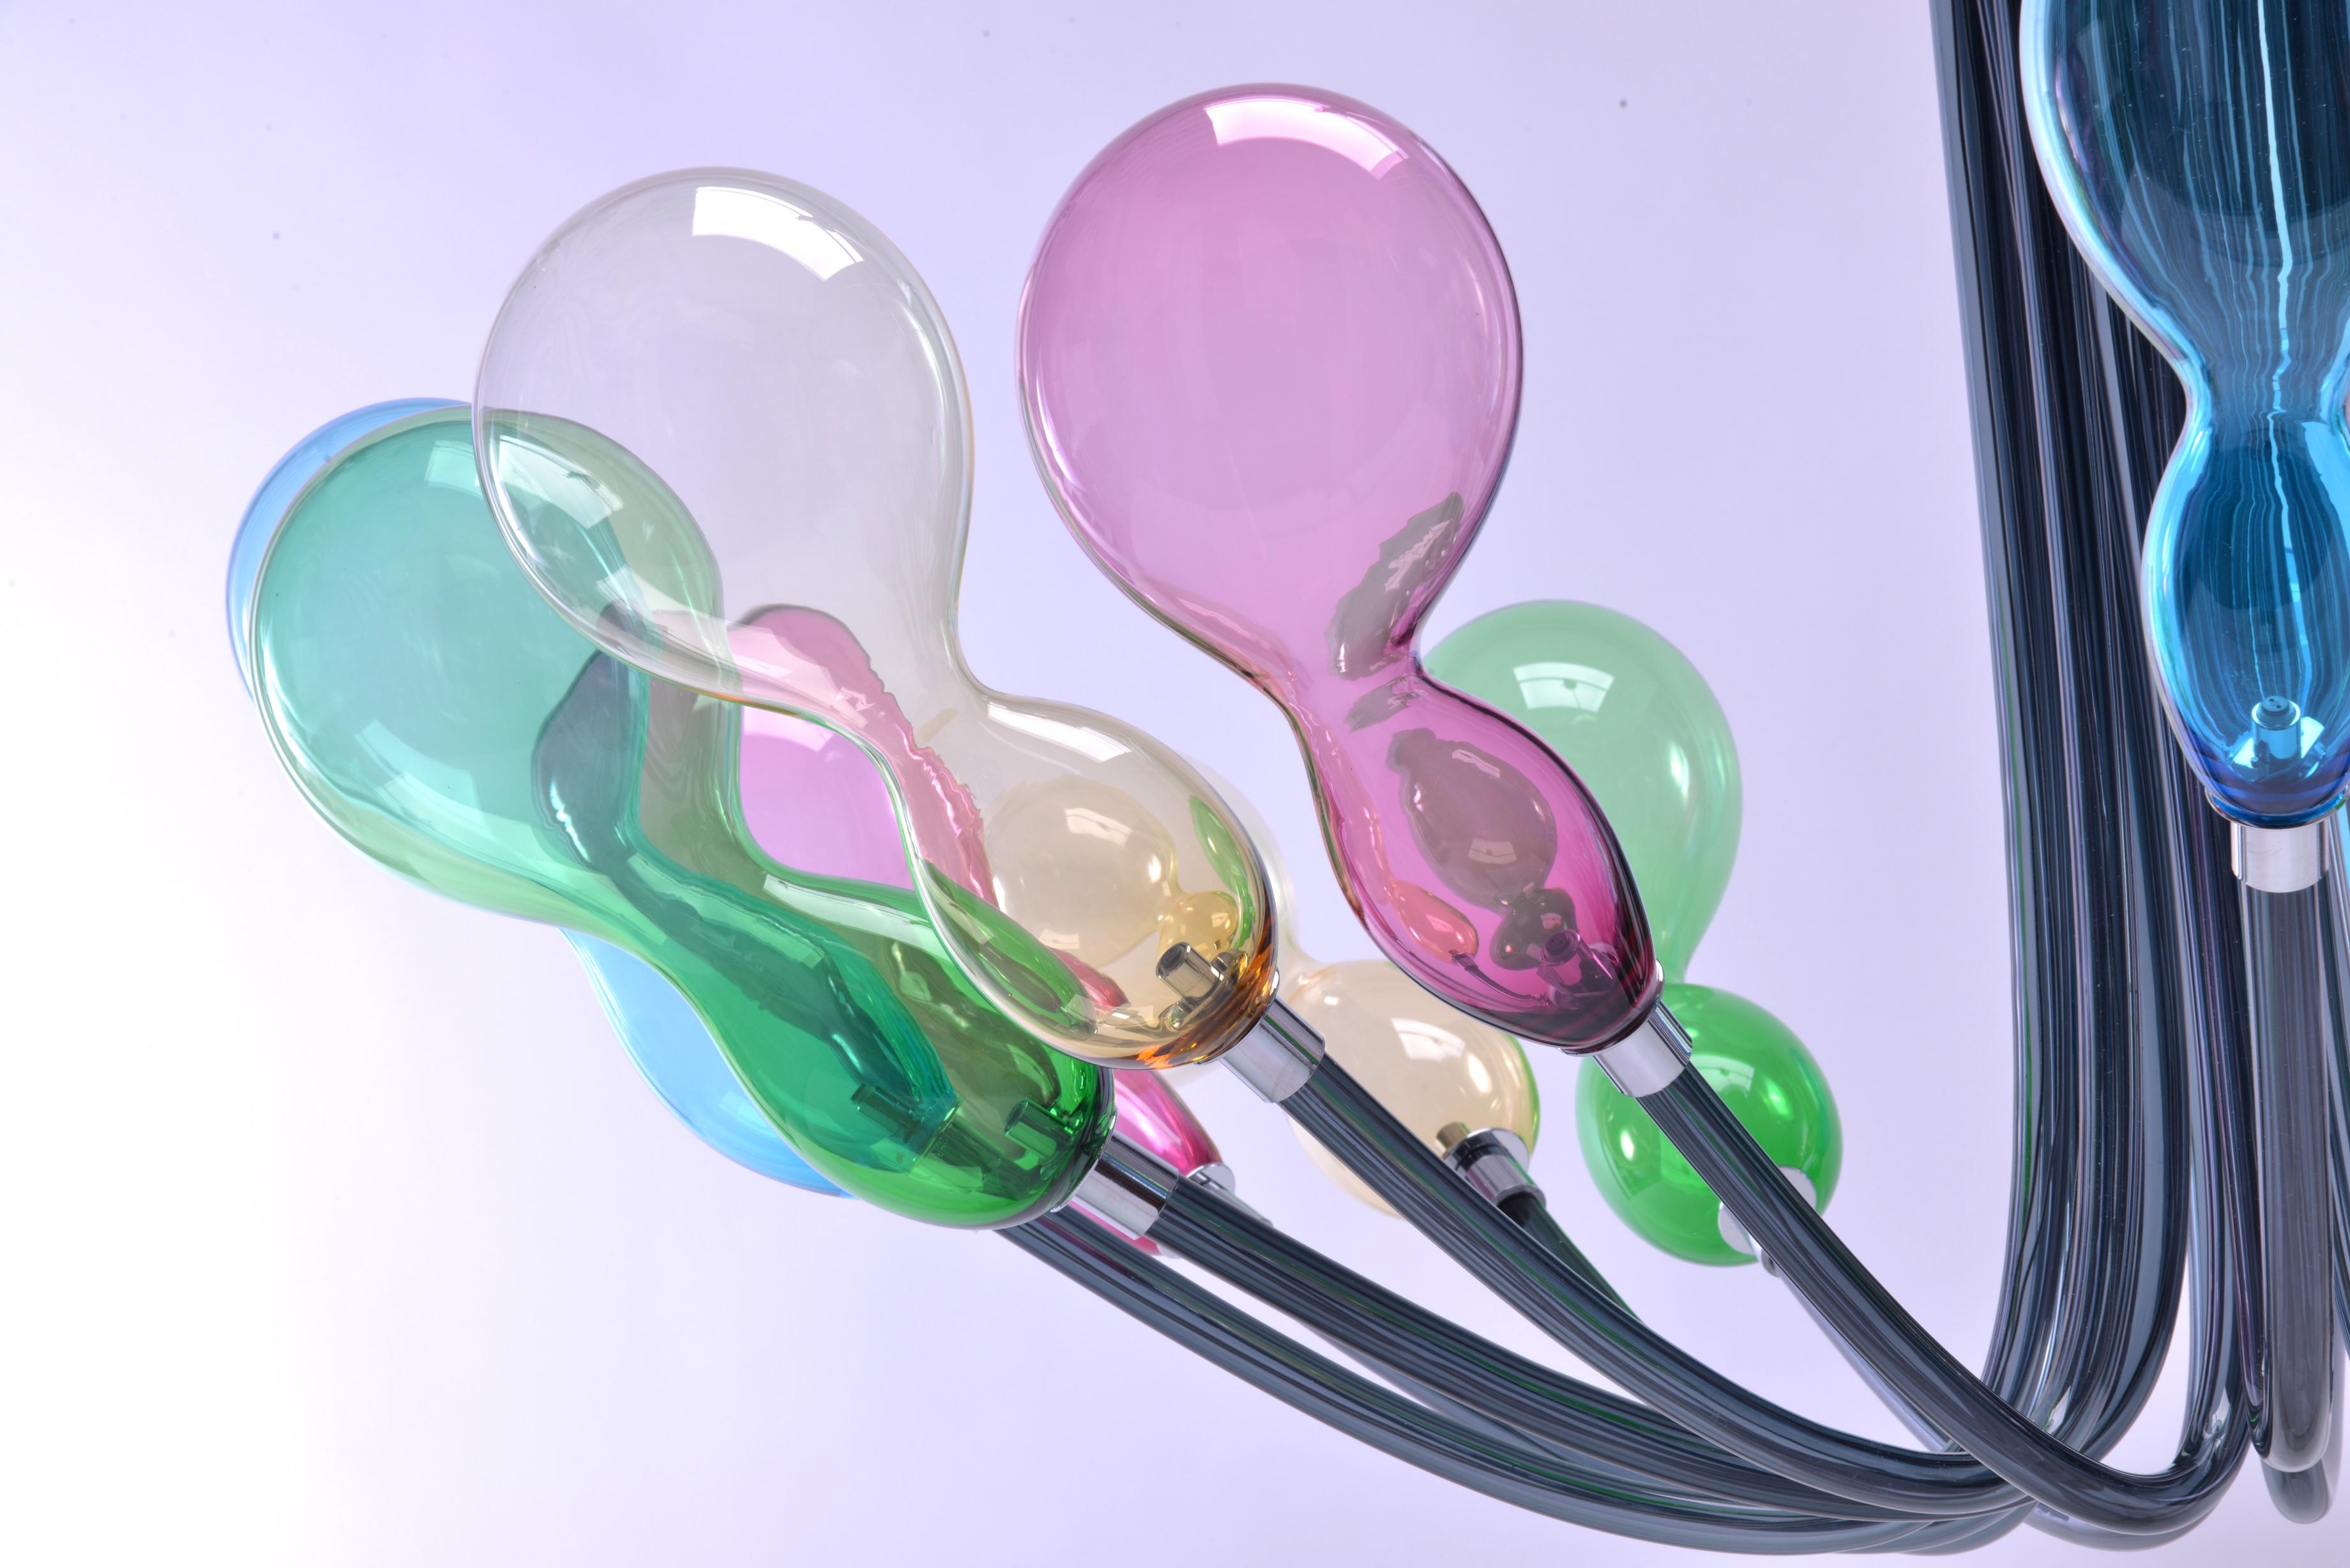 21st century Karim Rashid chandelier BLOB 16 lights Murano glass various colors.
The lighting parts of Blob seem to be light balloons suspended in the air, a fresh look for this new generation chandelier designed by Karim Rashid for Purho proposed